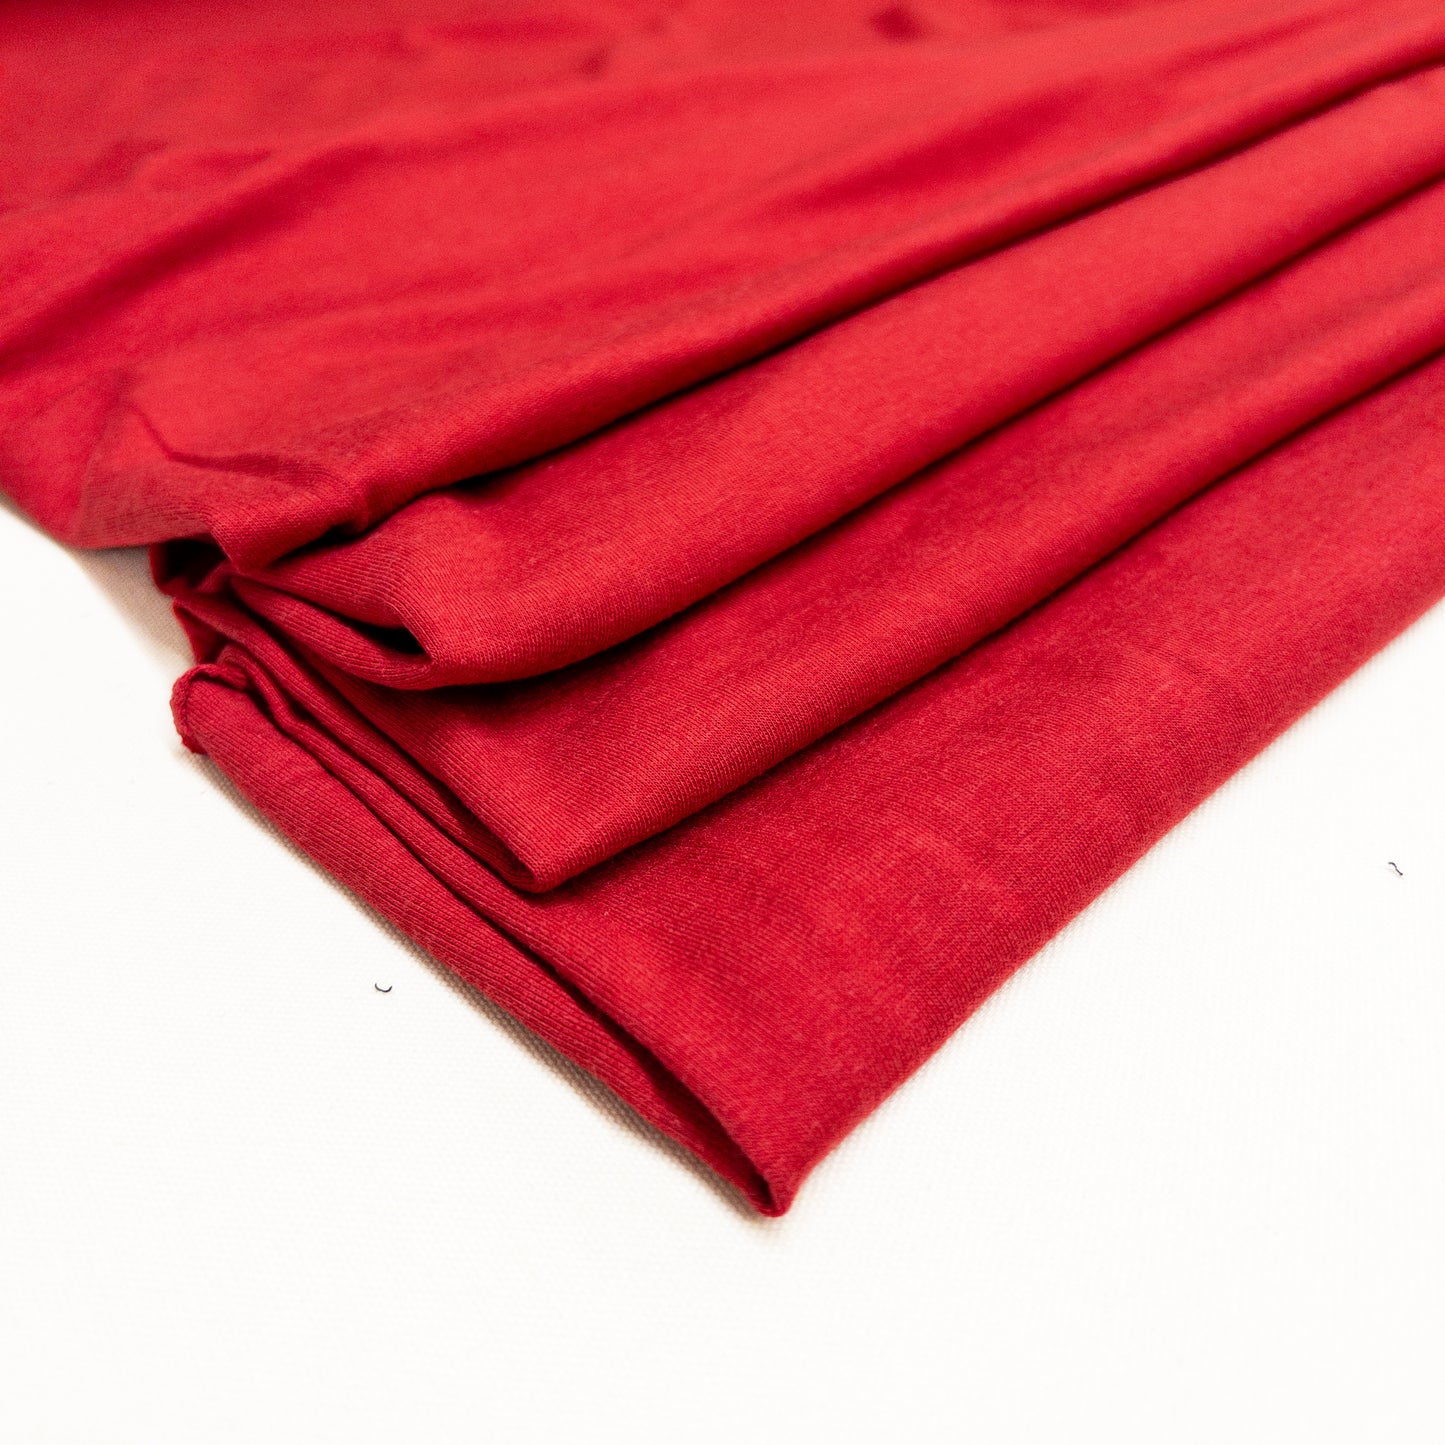 Bamboo/ Cotton French Terry in Deep Red